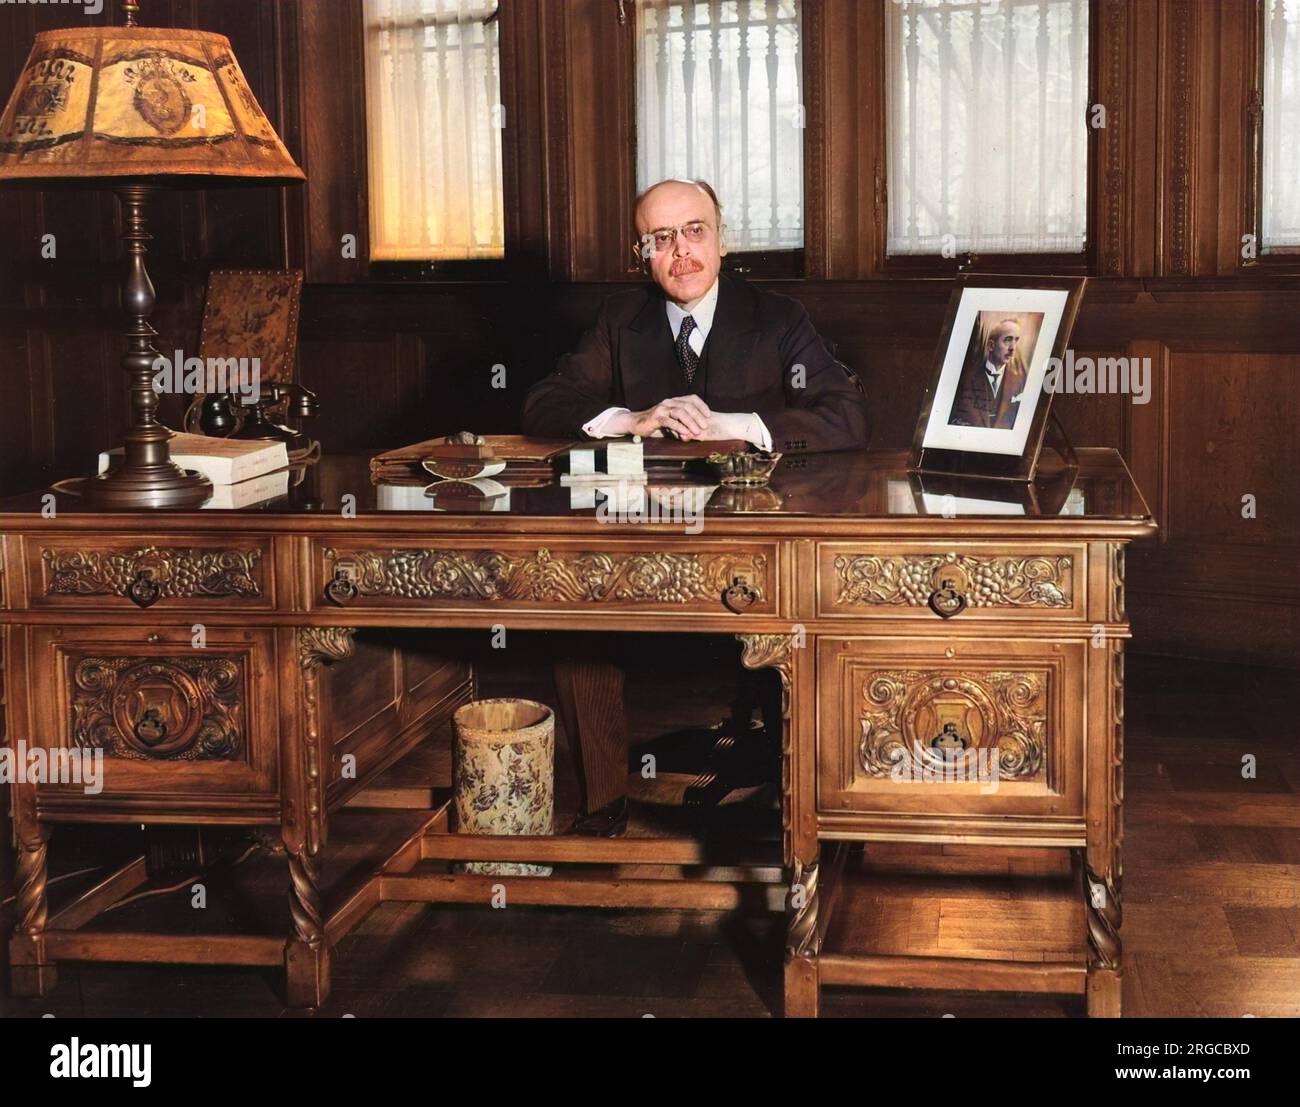 Mehmet Munir Ertegun (1883-1944) - Turkish Ambassador to the US at his desk in Washington DC. The Father of the Ahmet and Nesuhi Ertegun, who founded Atlantic Records and became iconic figures in the American music industry. Stock Photo